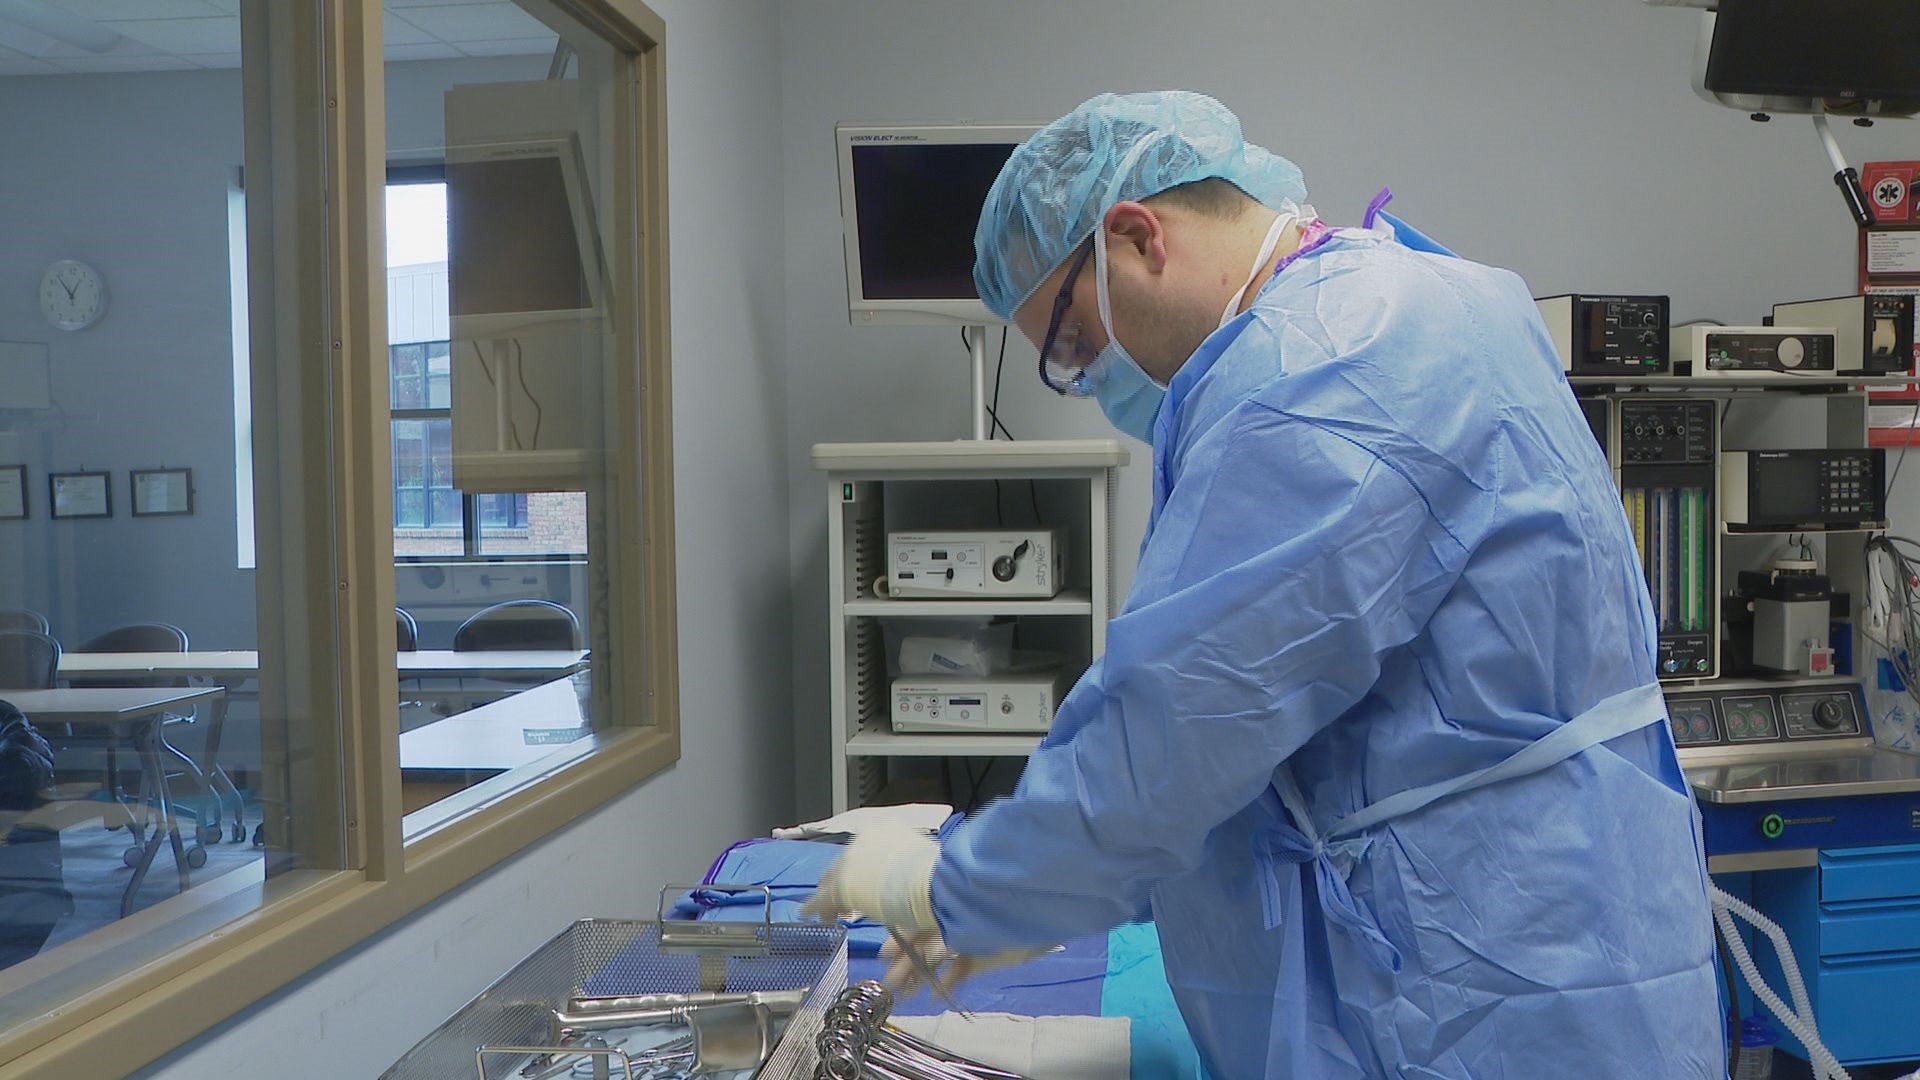 A director for a West Michigan program says the shortage causes hospitals to decrease surgeries, or even close operating rooms, and longer surgeries for patients.